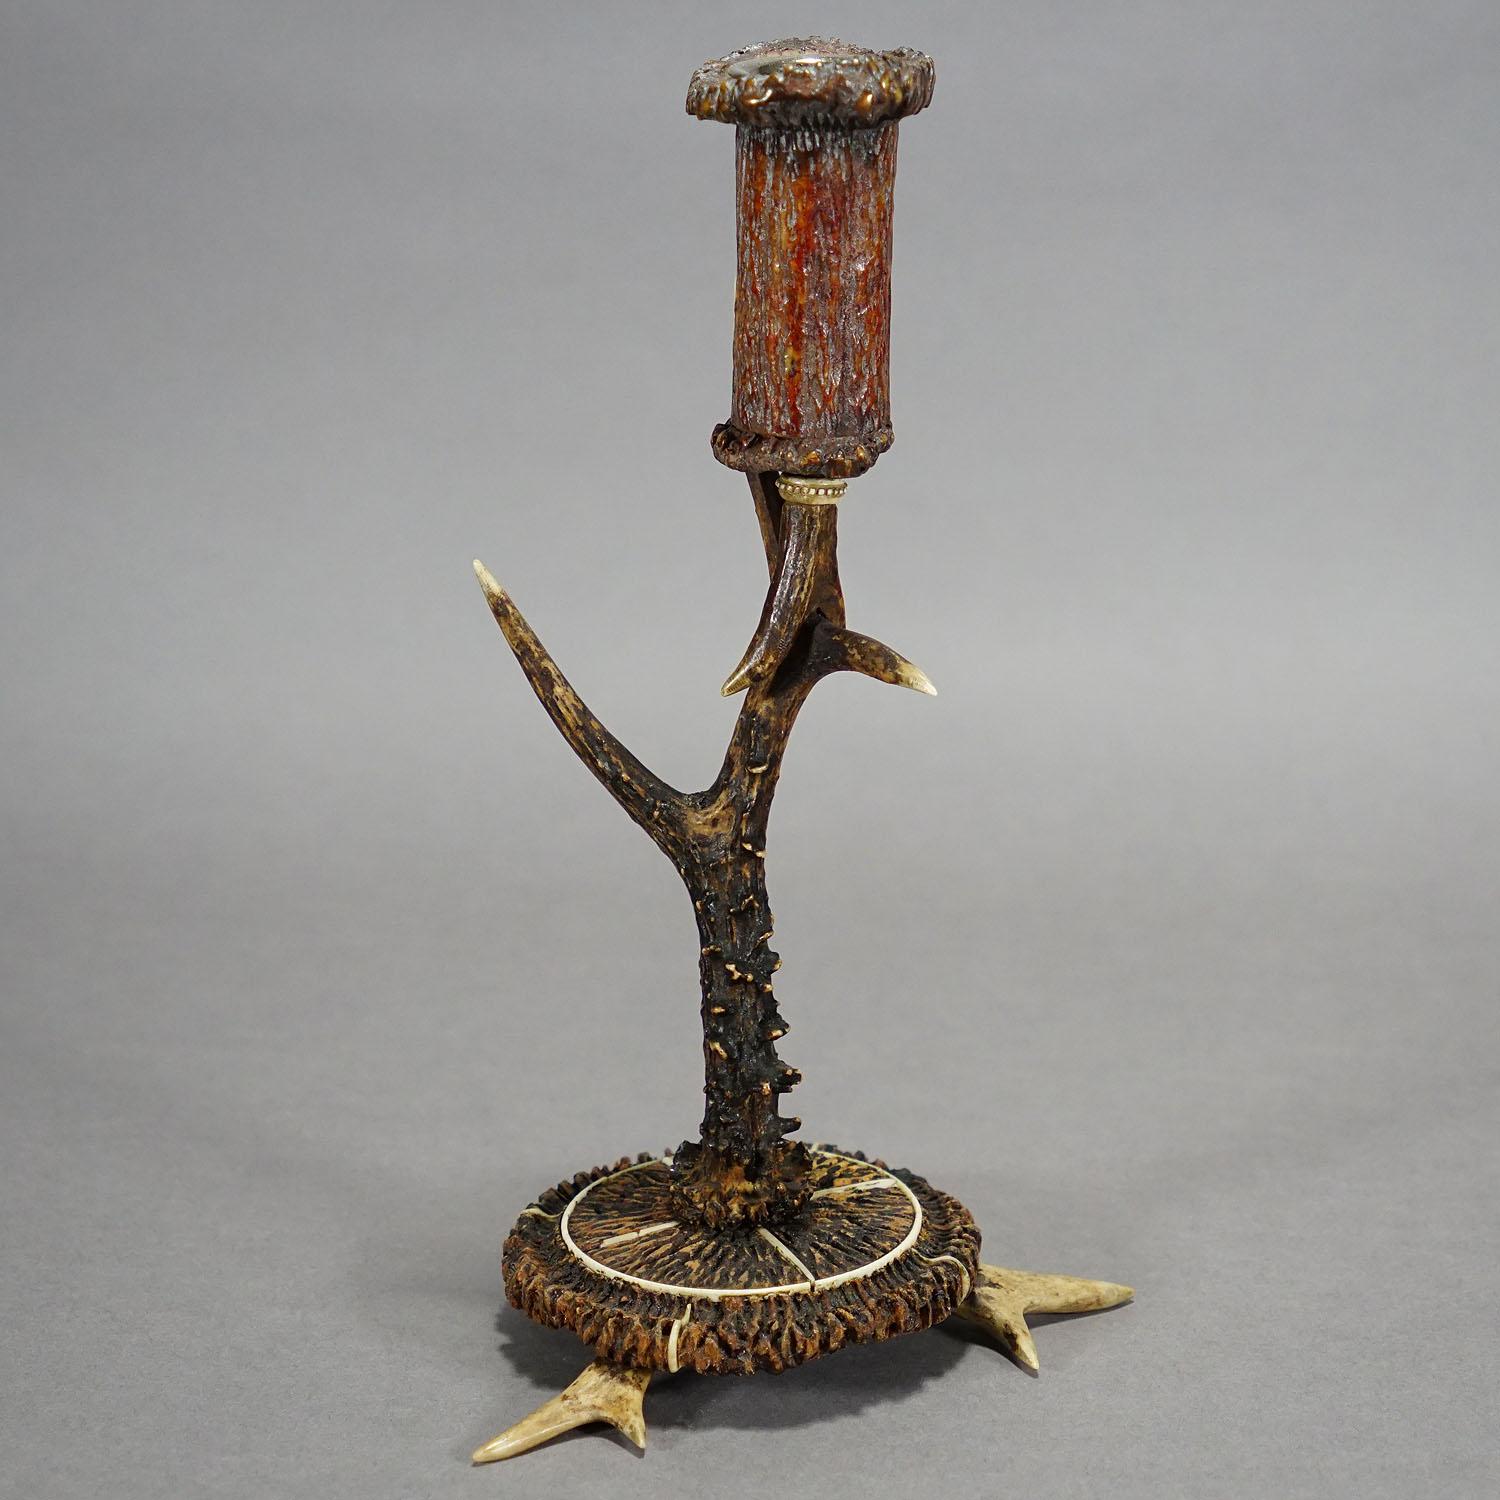 Rustic Stylish Cabin Decor Antler Candle Holder with Deer Carving, Germany ca. 1900 For Sale